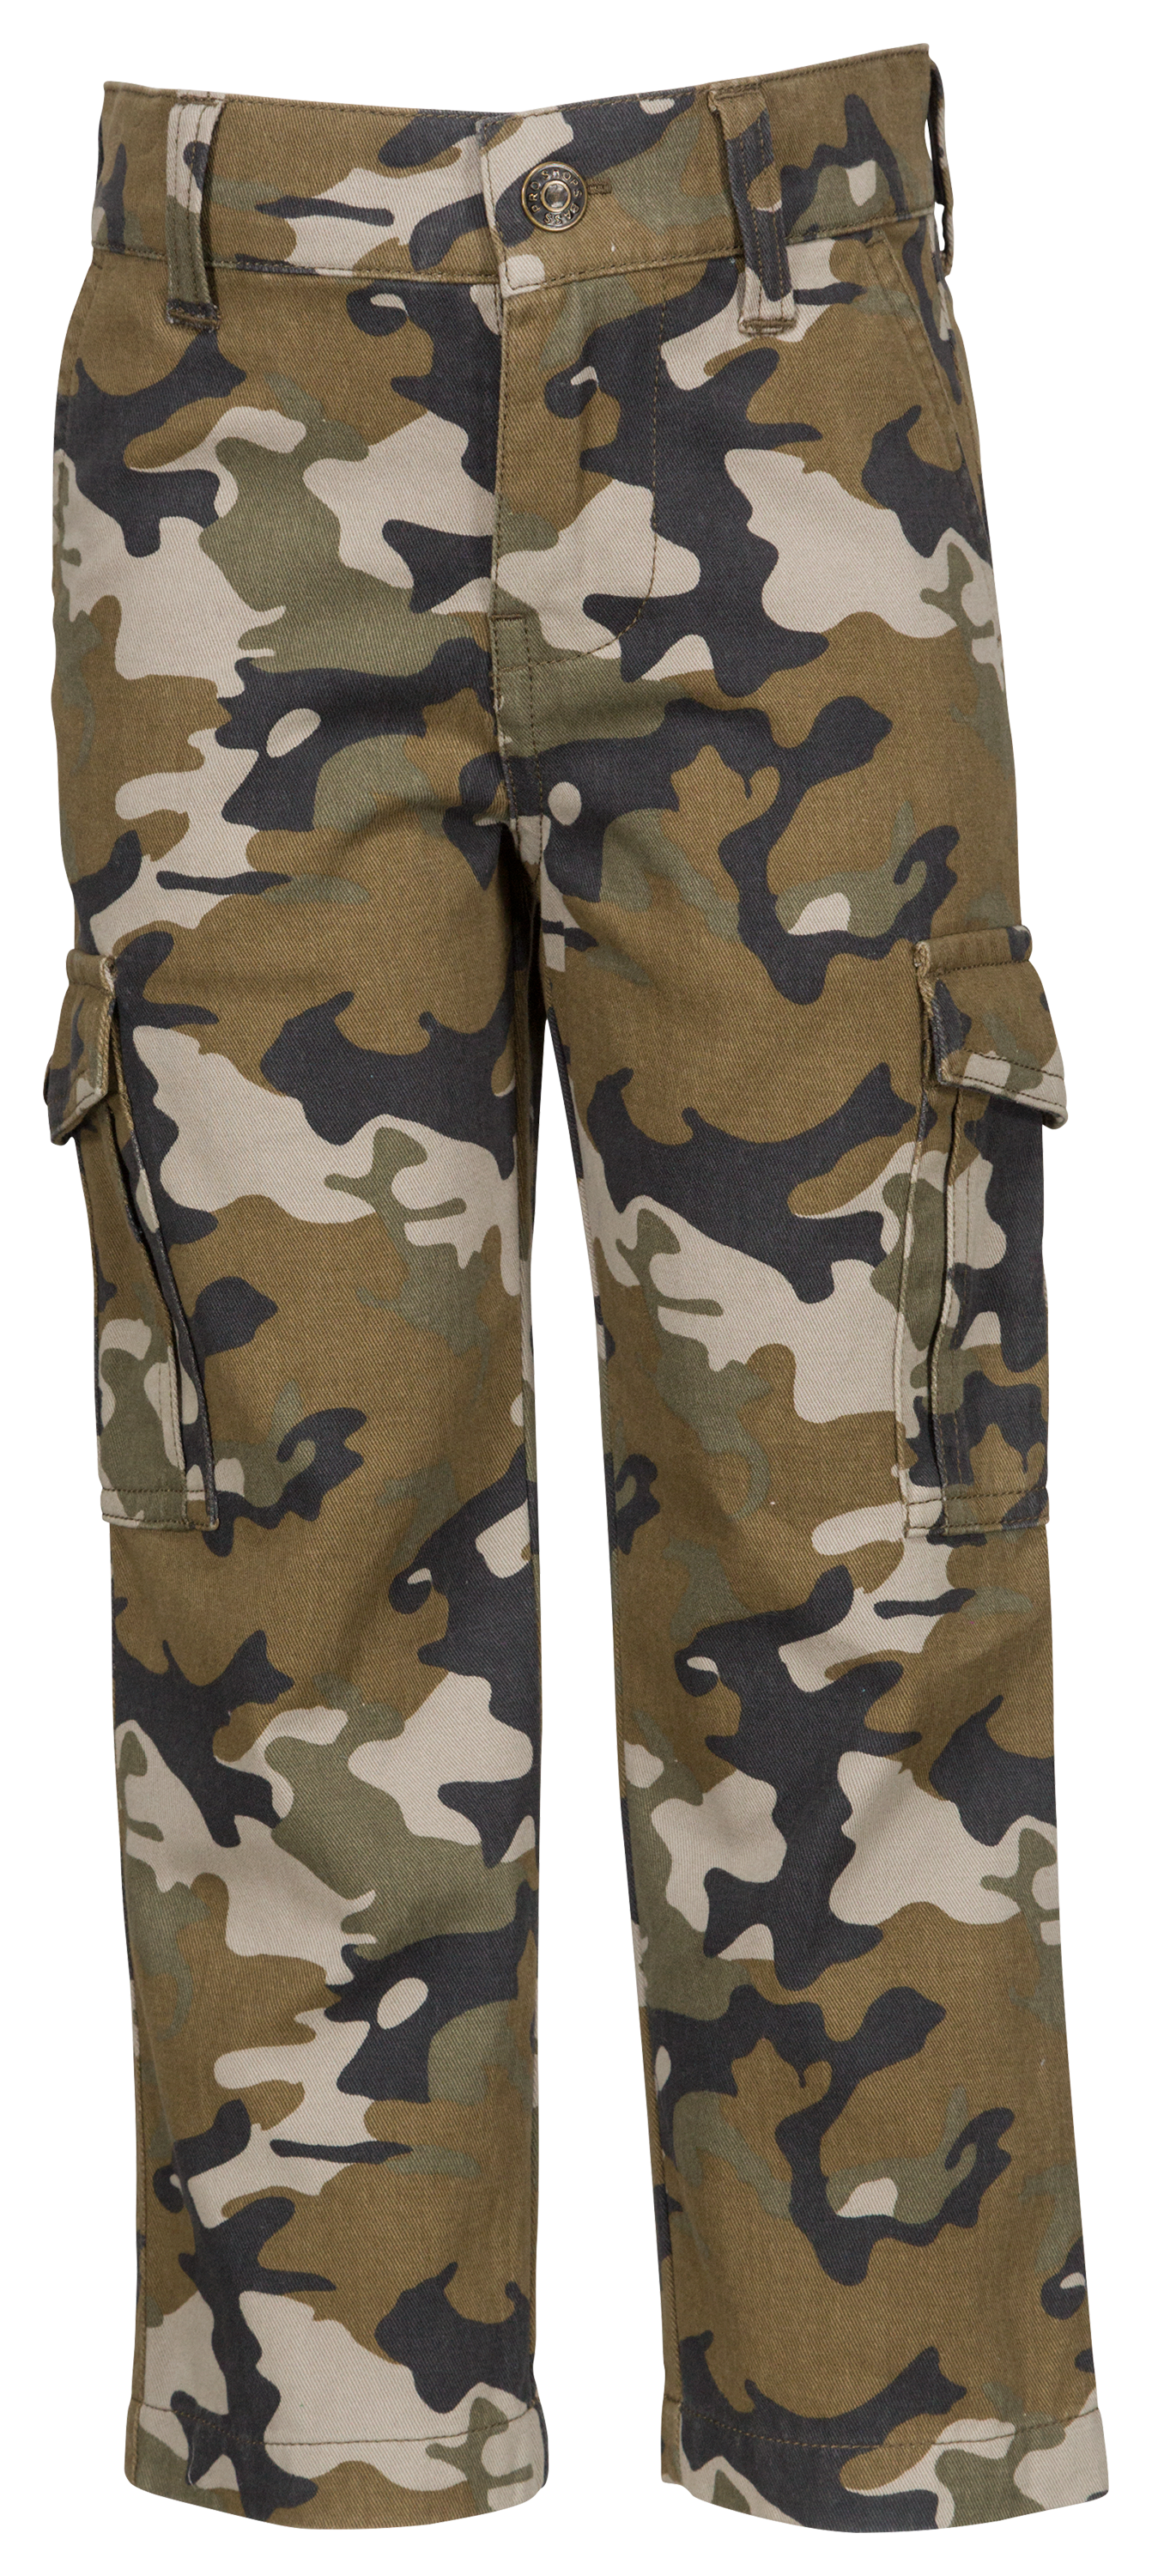 Bass Pro Shops Camo Cargo Pants for Toddlers or Boys